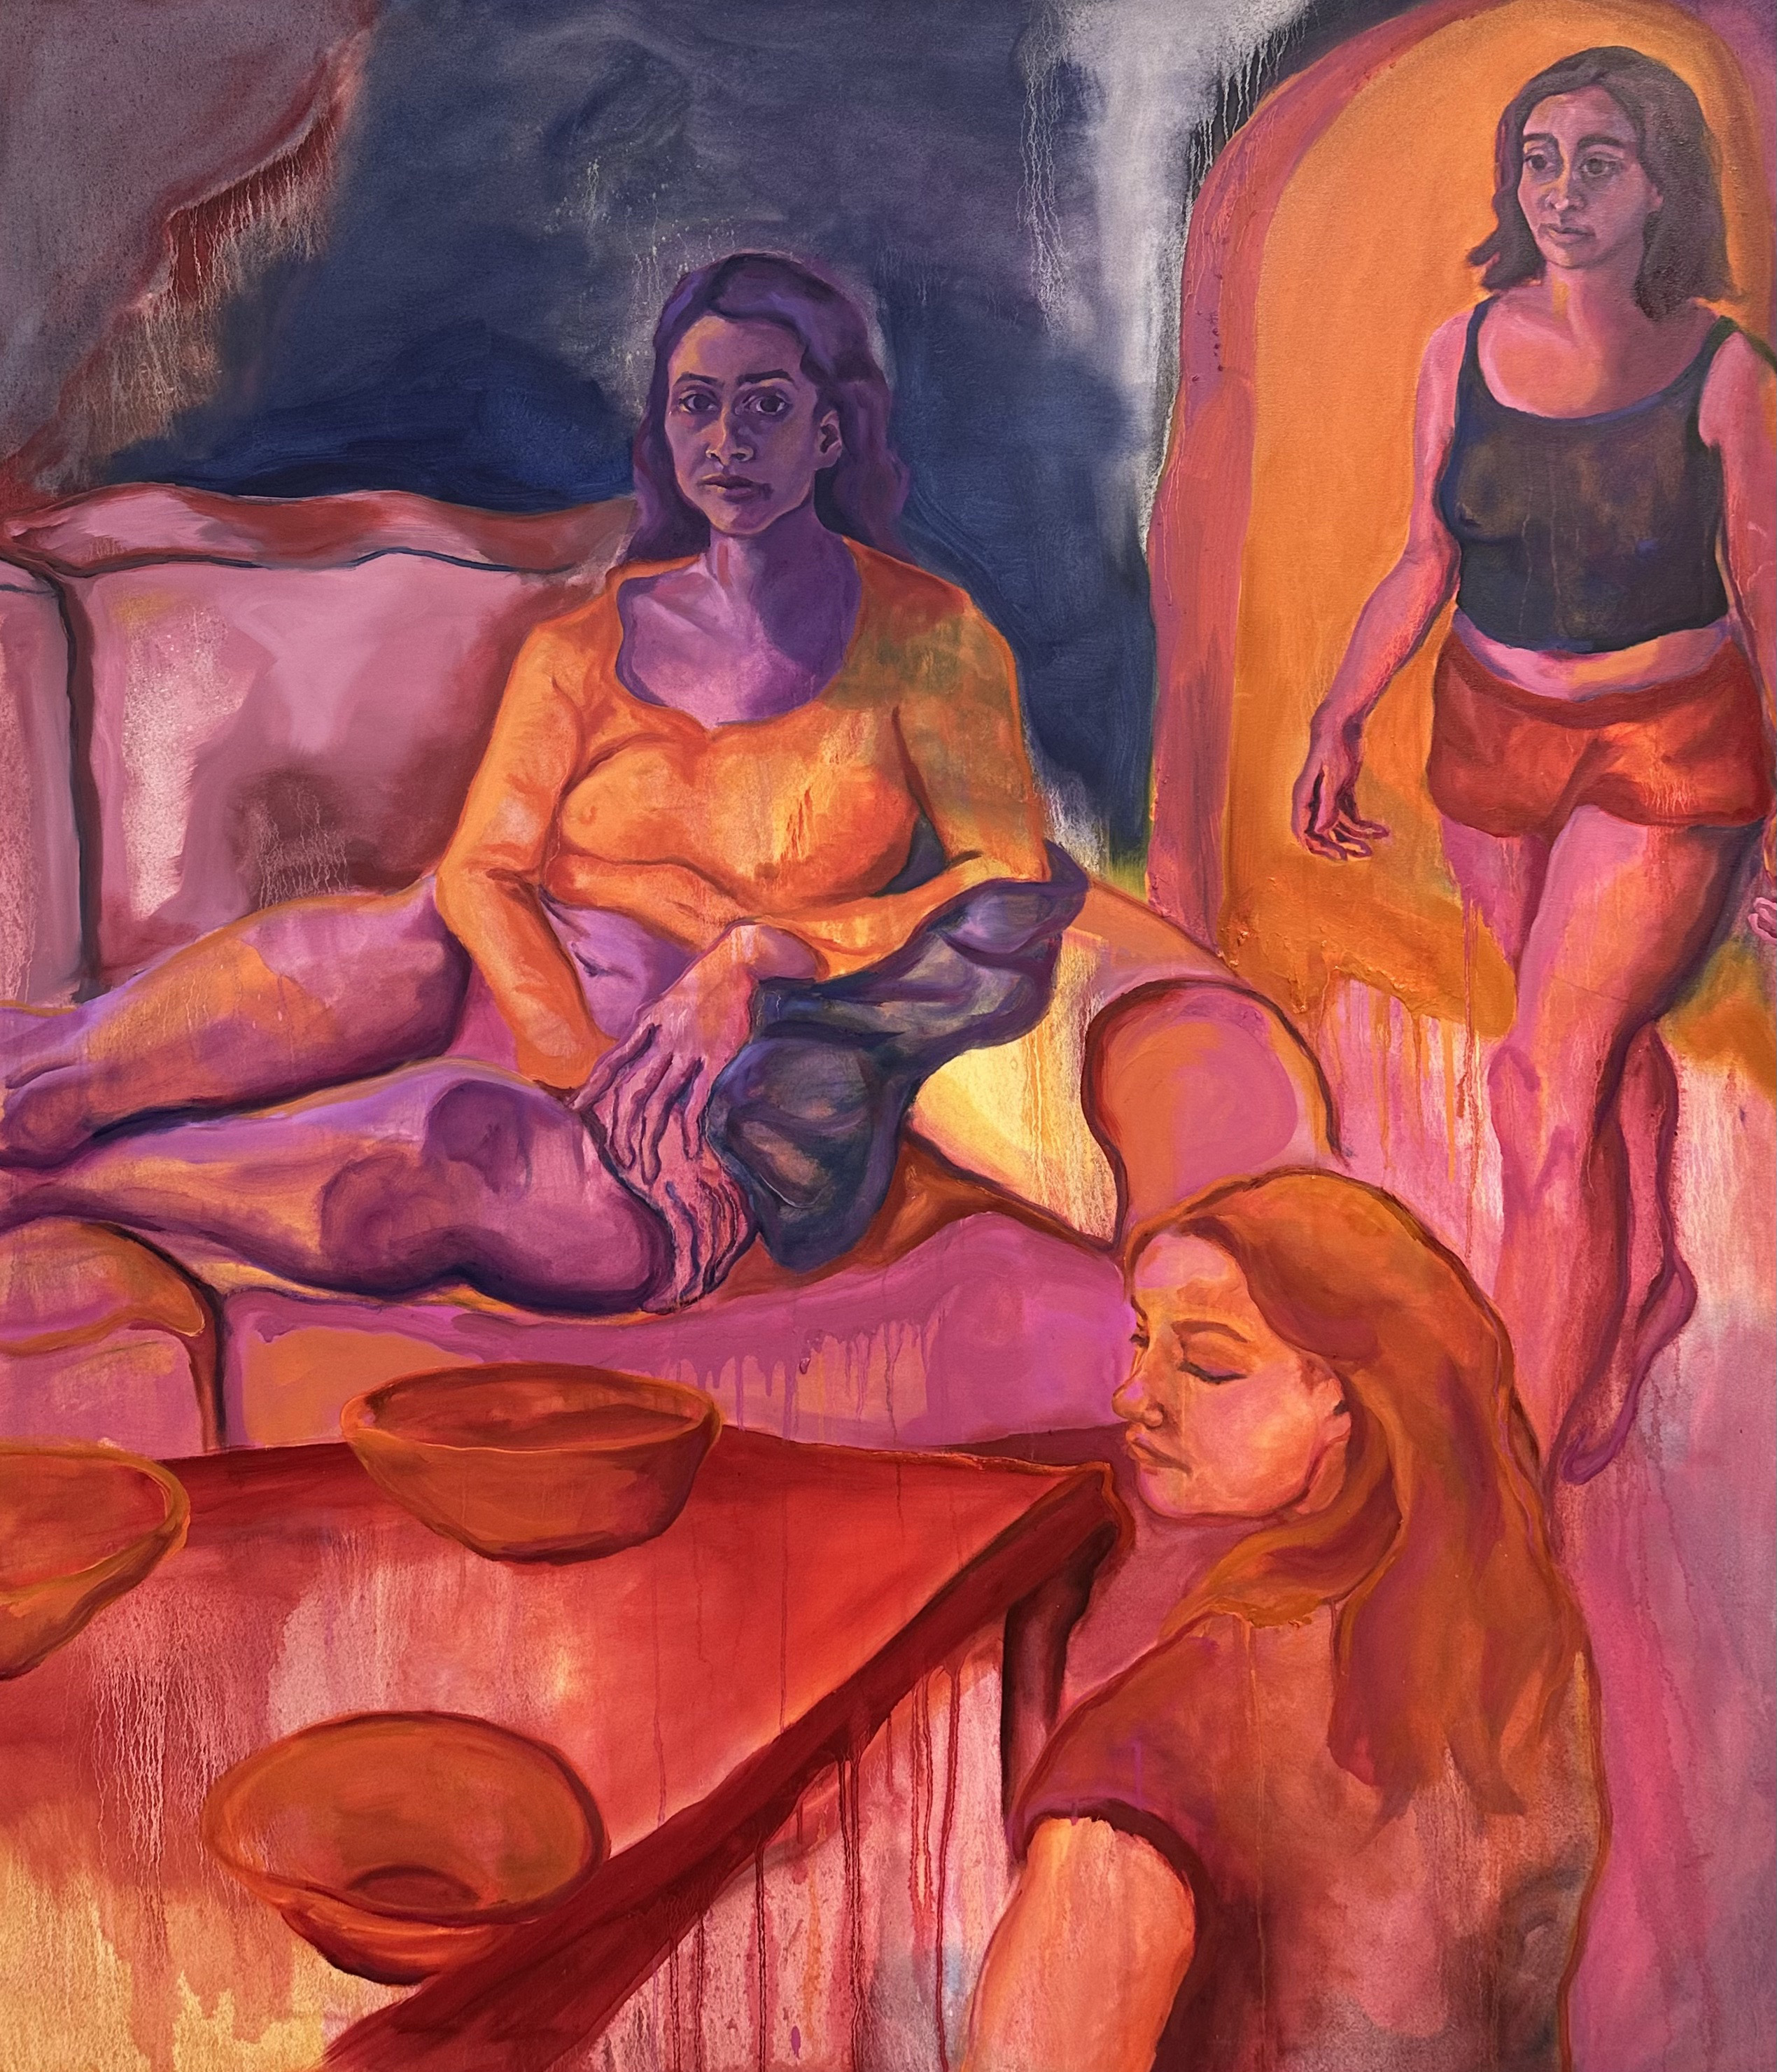 'If we're vessels, then I'm full of meals cooked for one another', Tabitha Rose Owen, Oil on Canvas, 180 x 155 cm